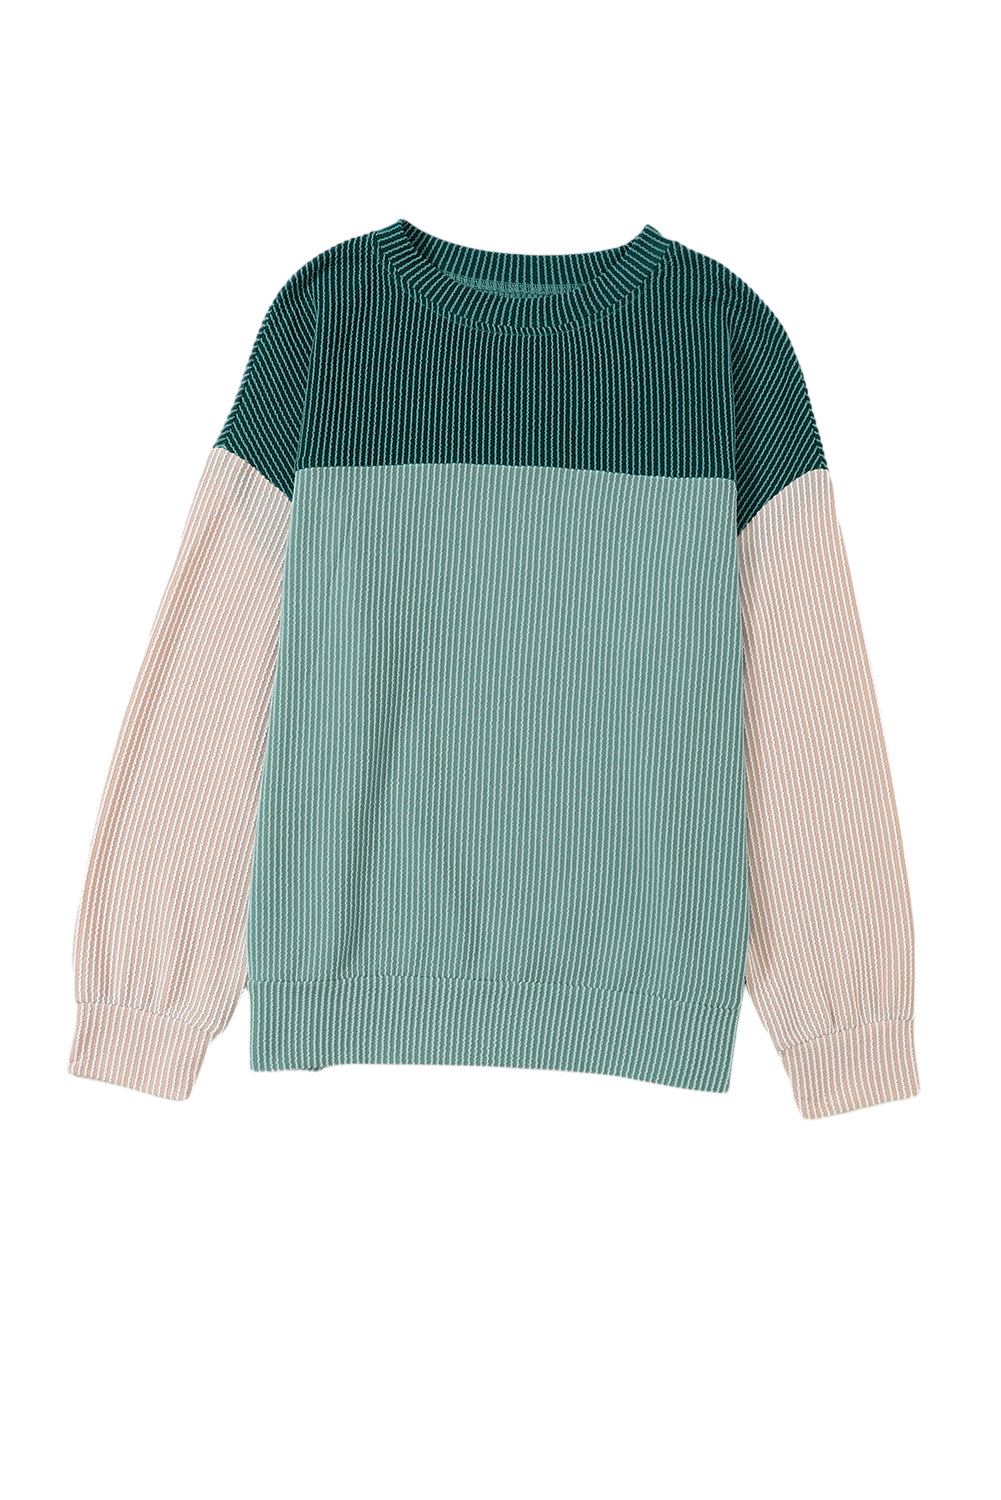 Green Color Block Long Sleeve Ribbed Loose Top - Dixie Hike & Style